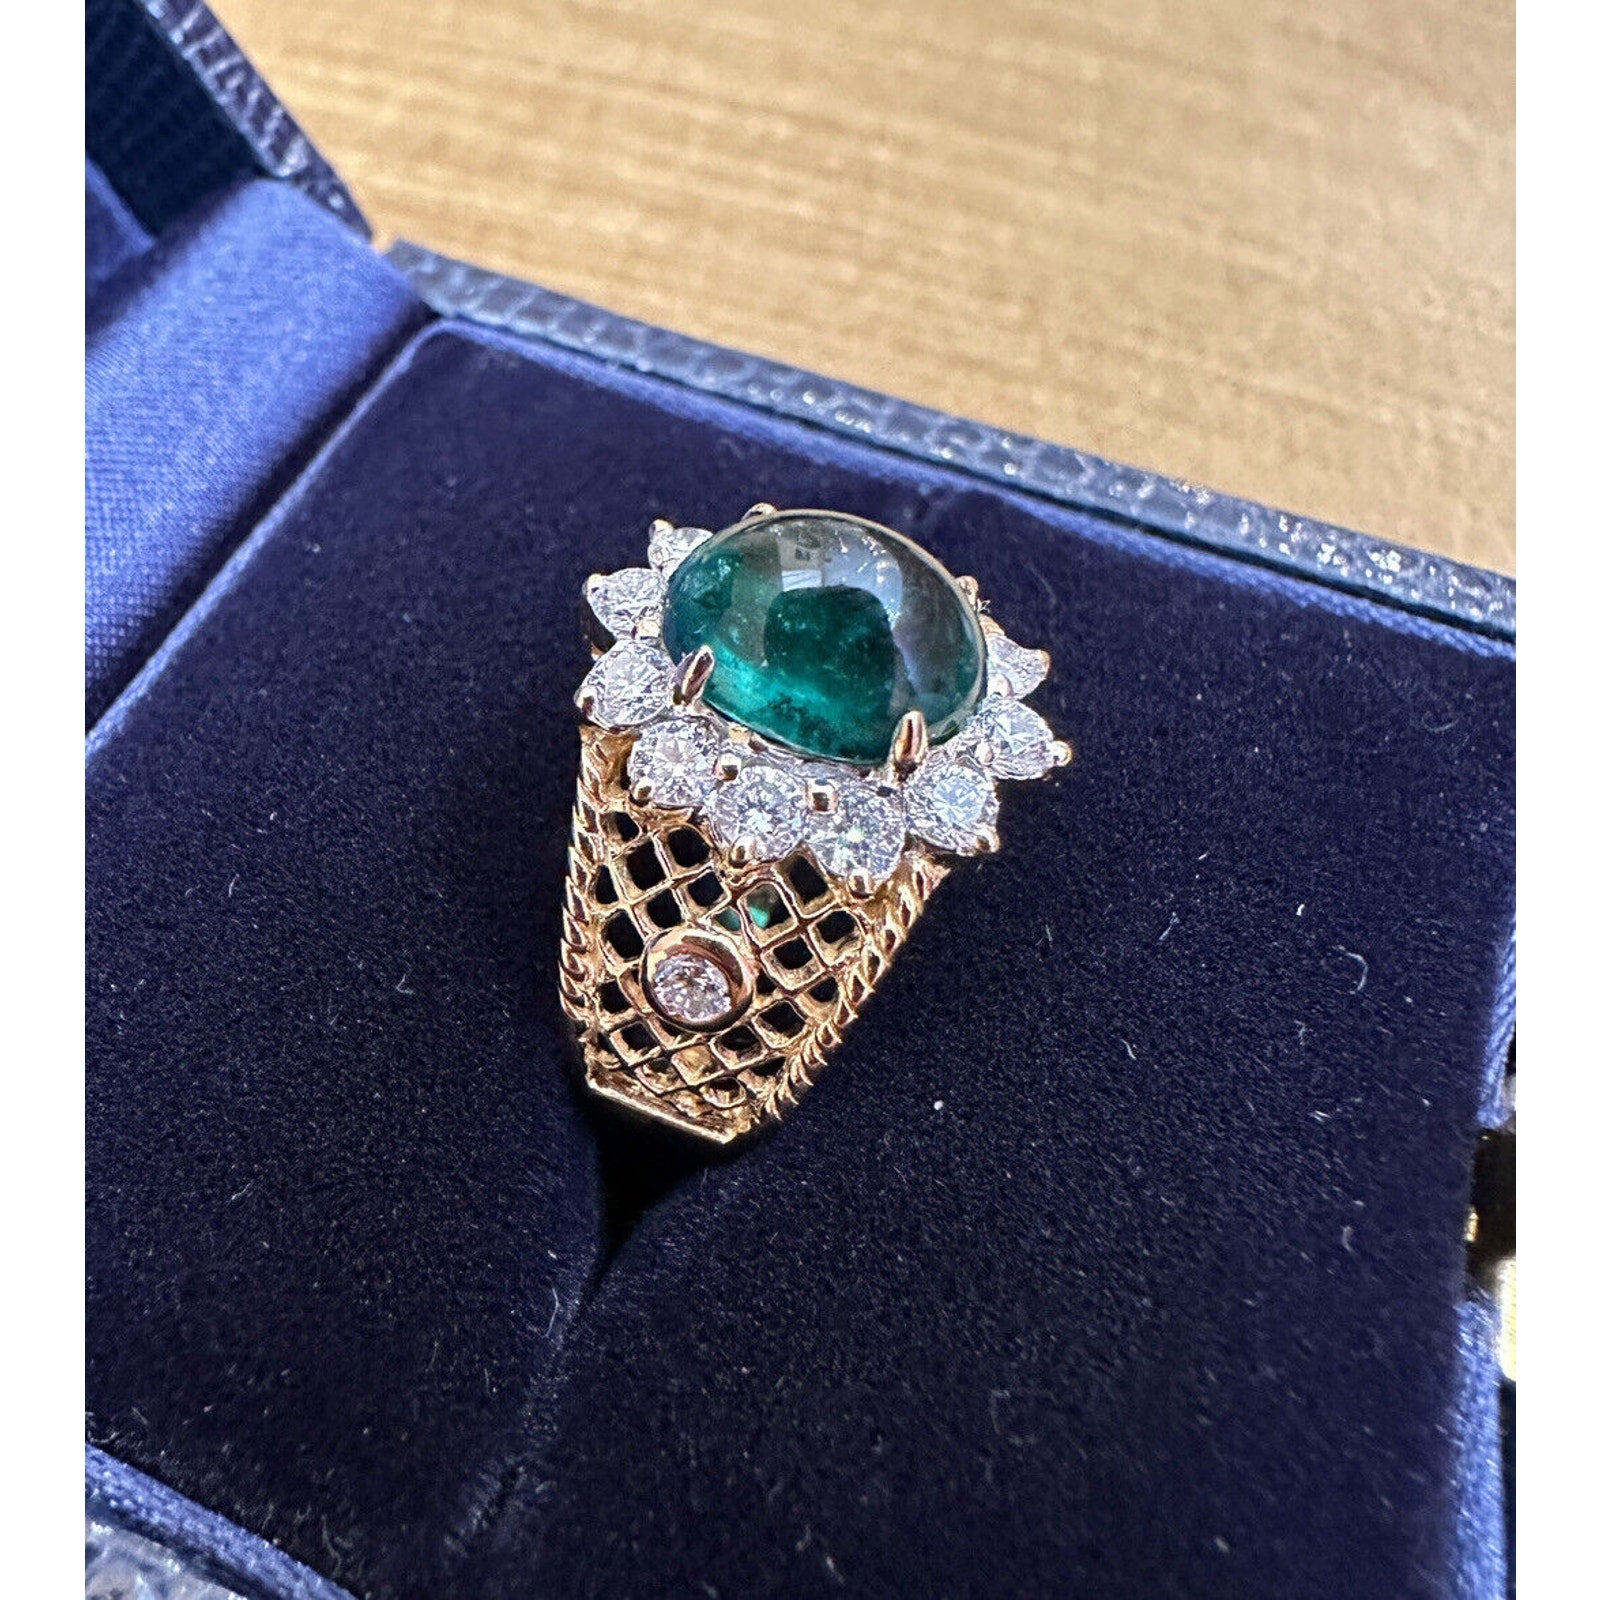 Estate 2.27 carat Emerald Cabochon with Diamond Halo in 18k Yellow Gold